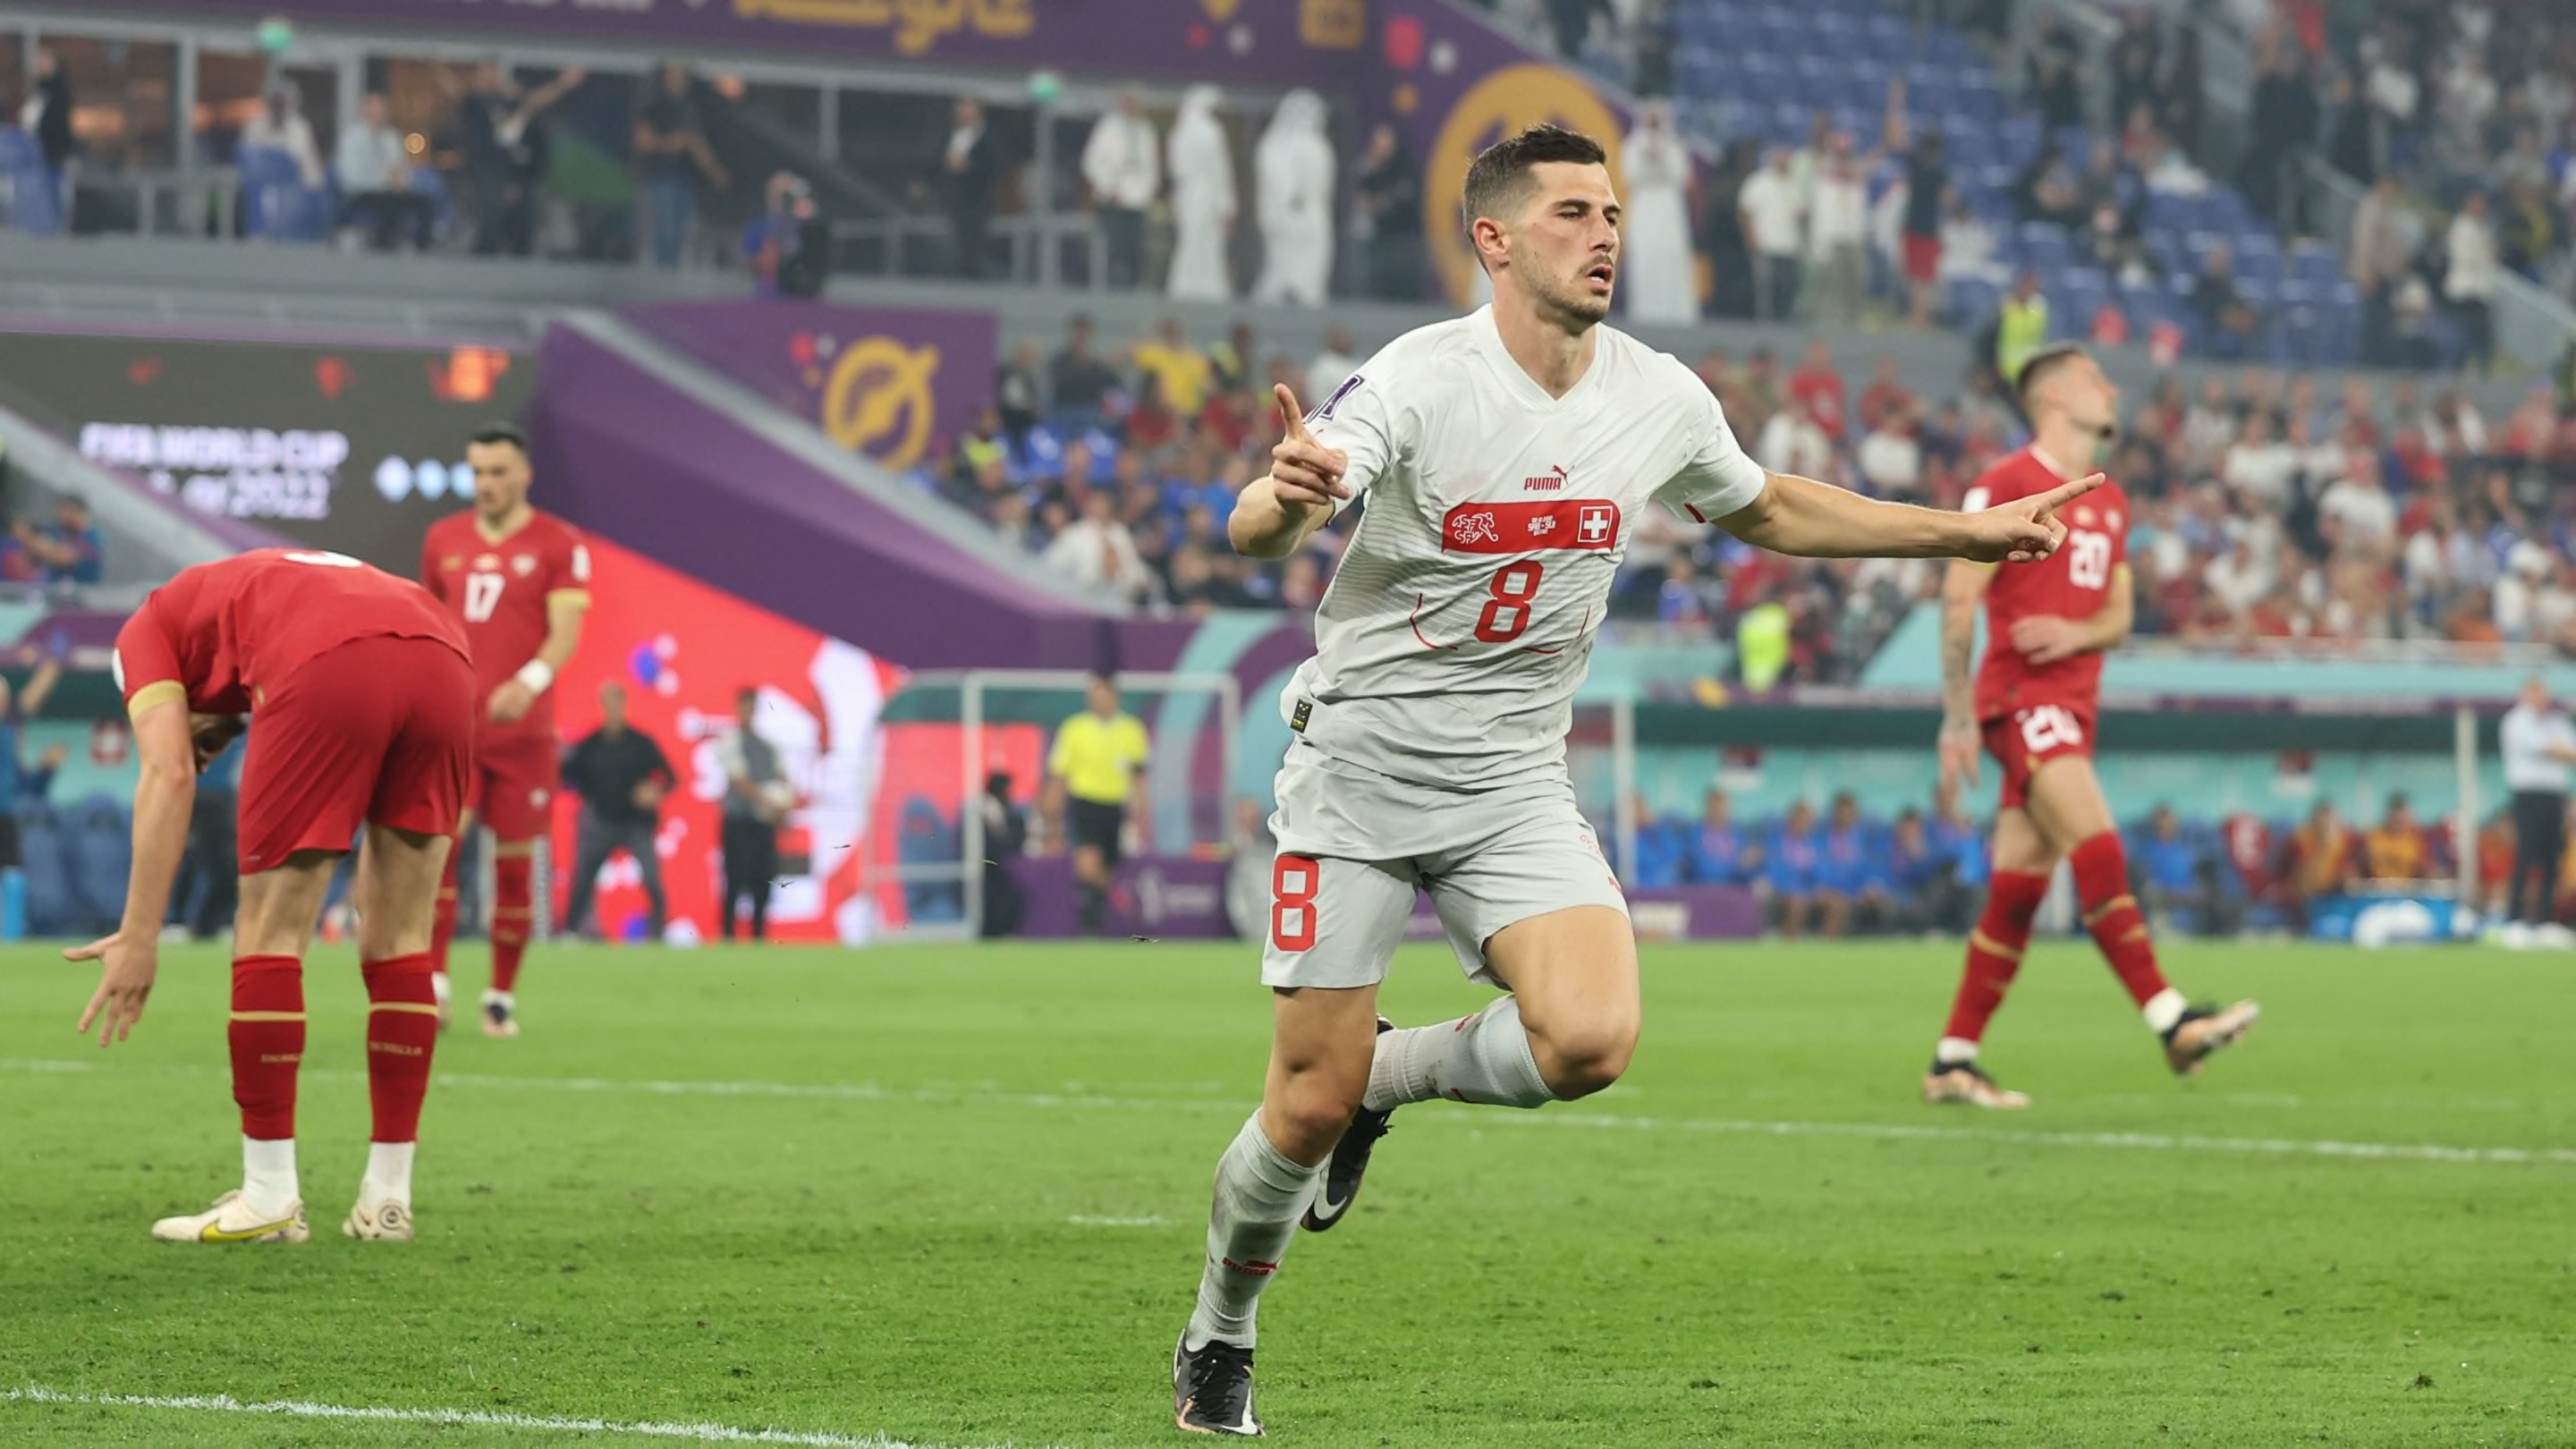 Serbia 2-3 Switzerland: Player ratings as Swiss survive goal fest to reach World Cup knockouts